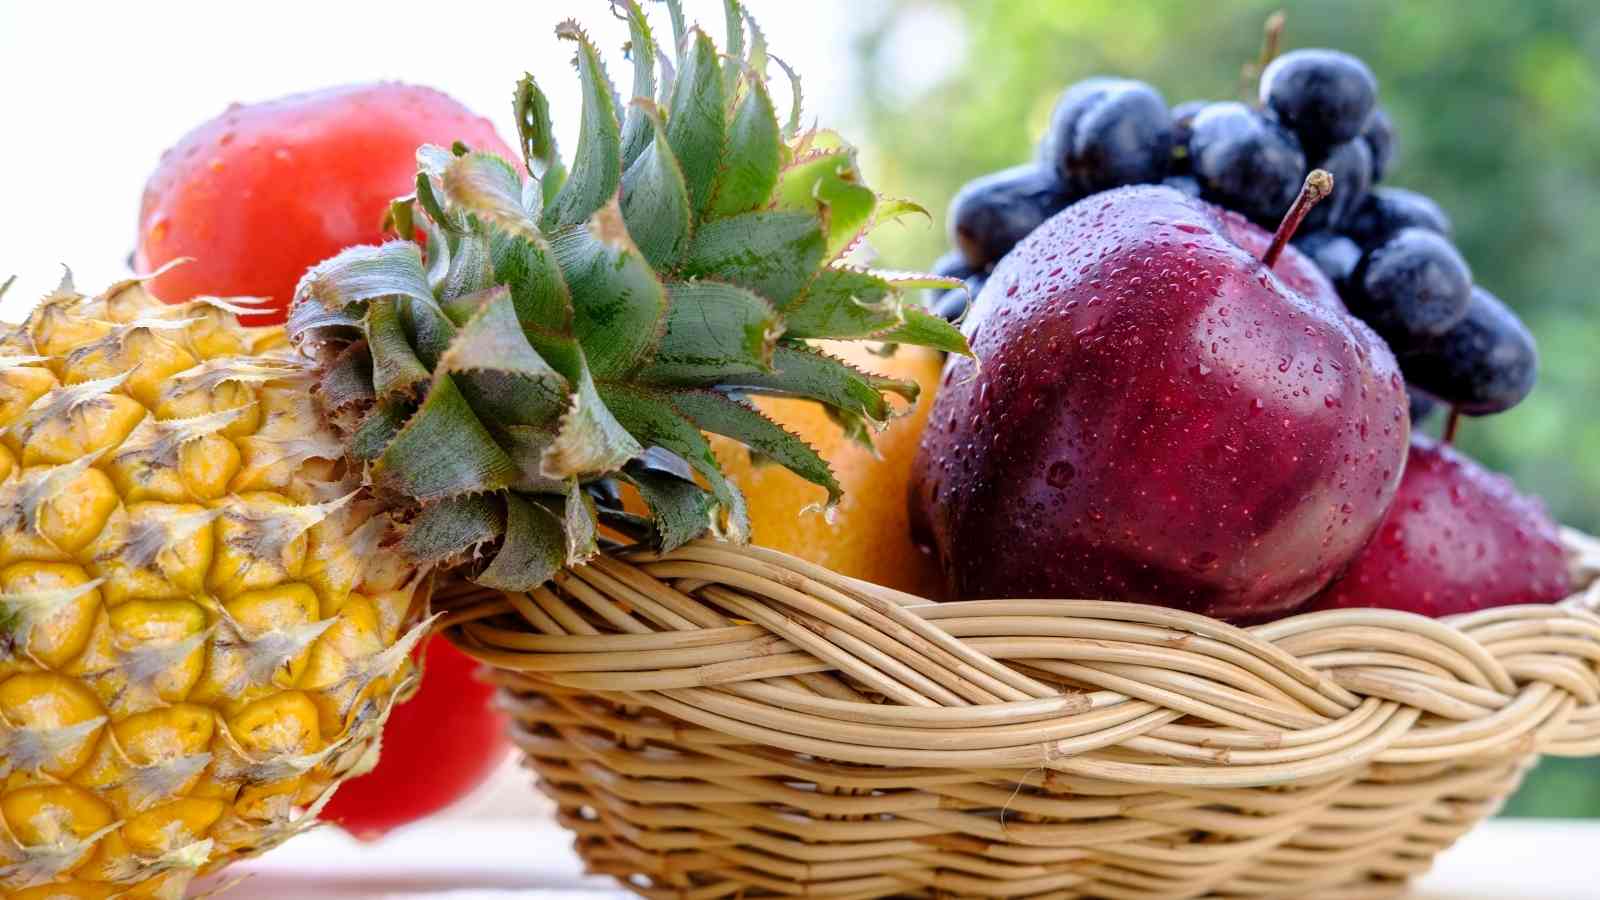 Fruits and Vegetables in Season